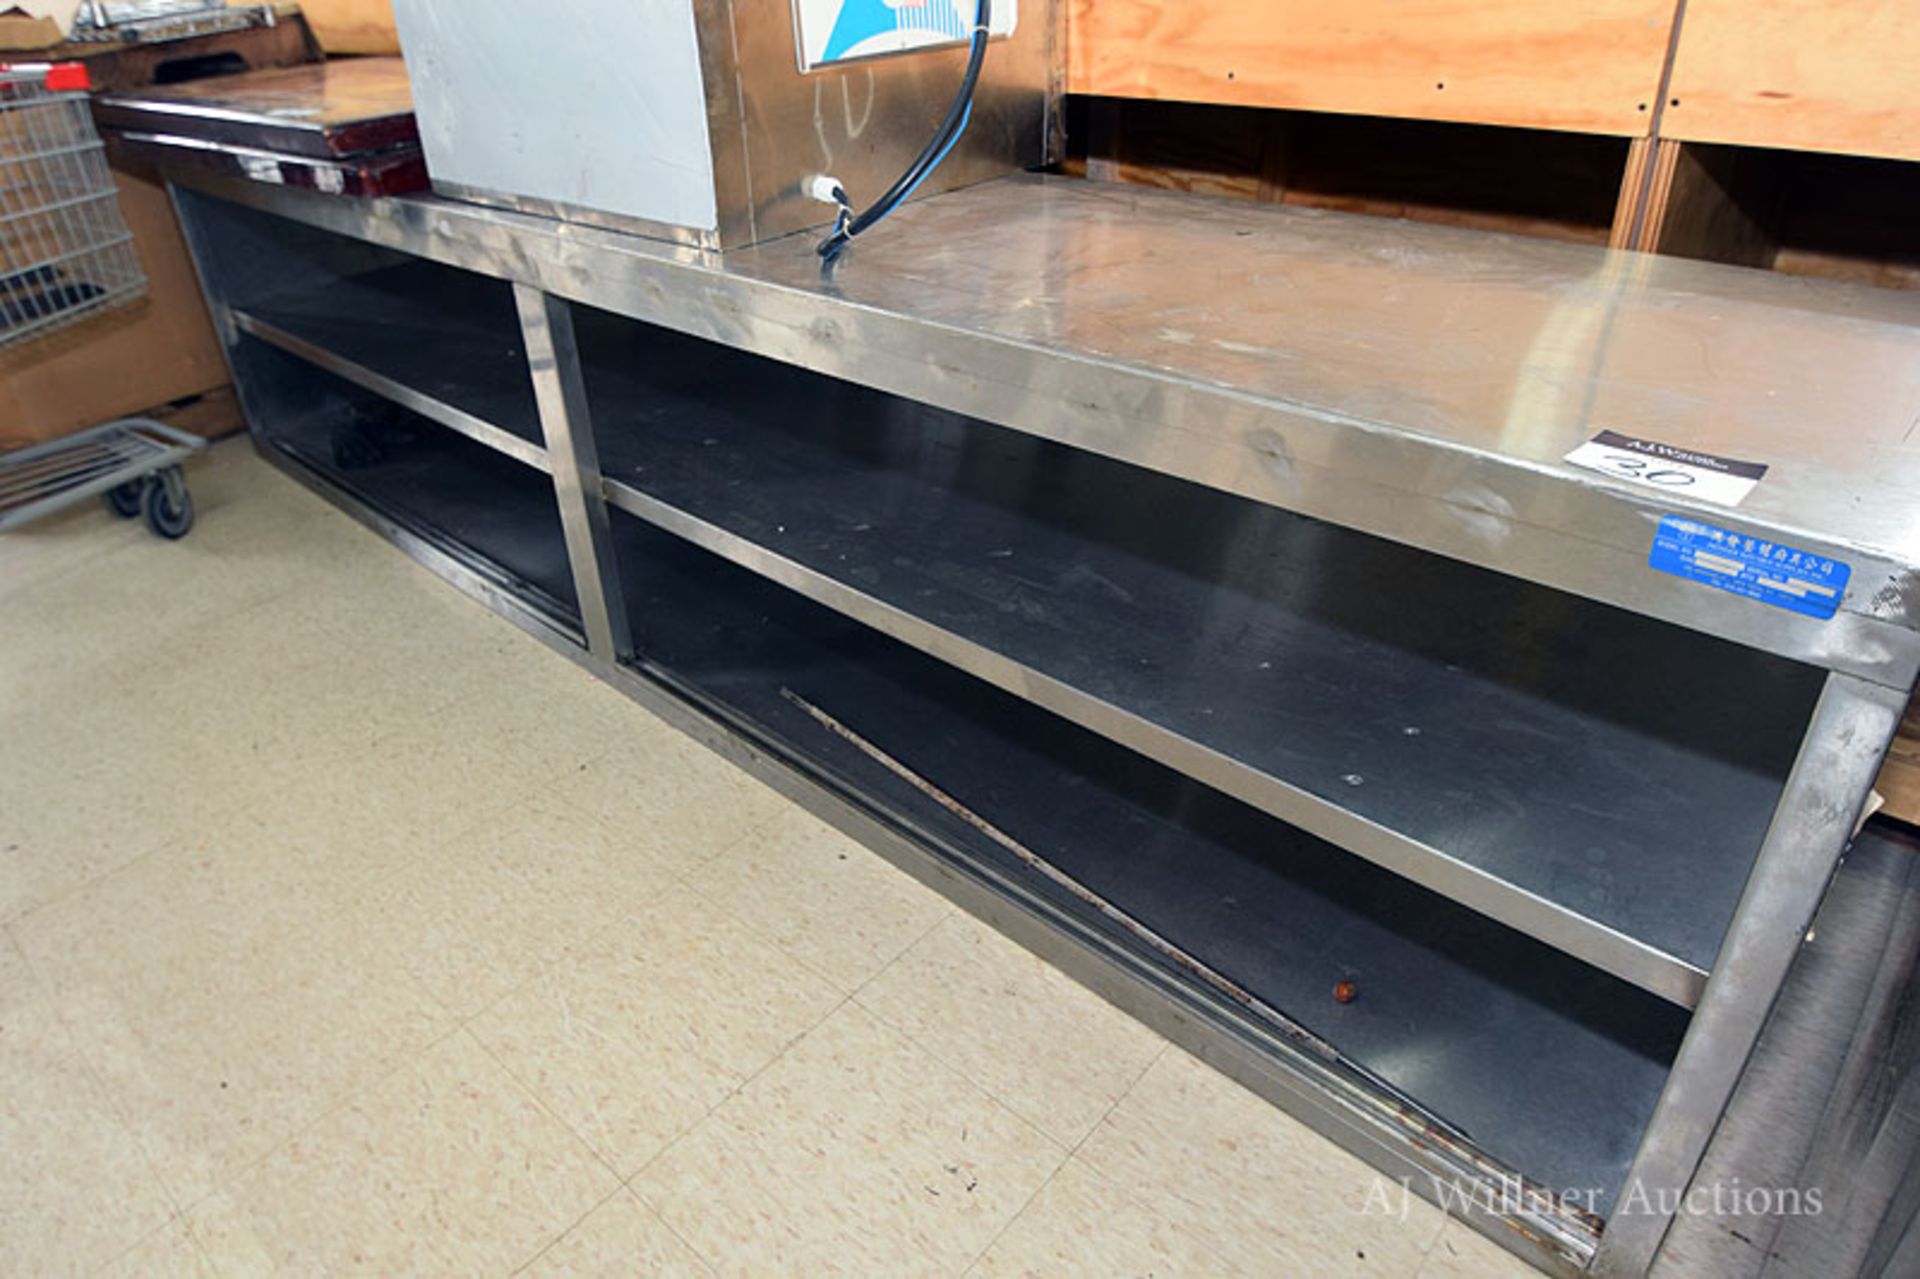 Stainless Steel Cabinet, 24"x120"x28" high